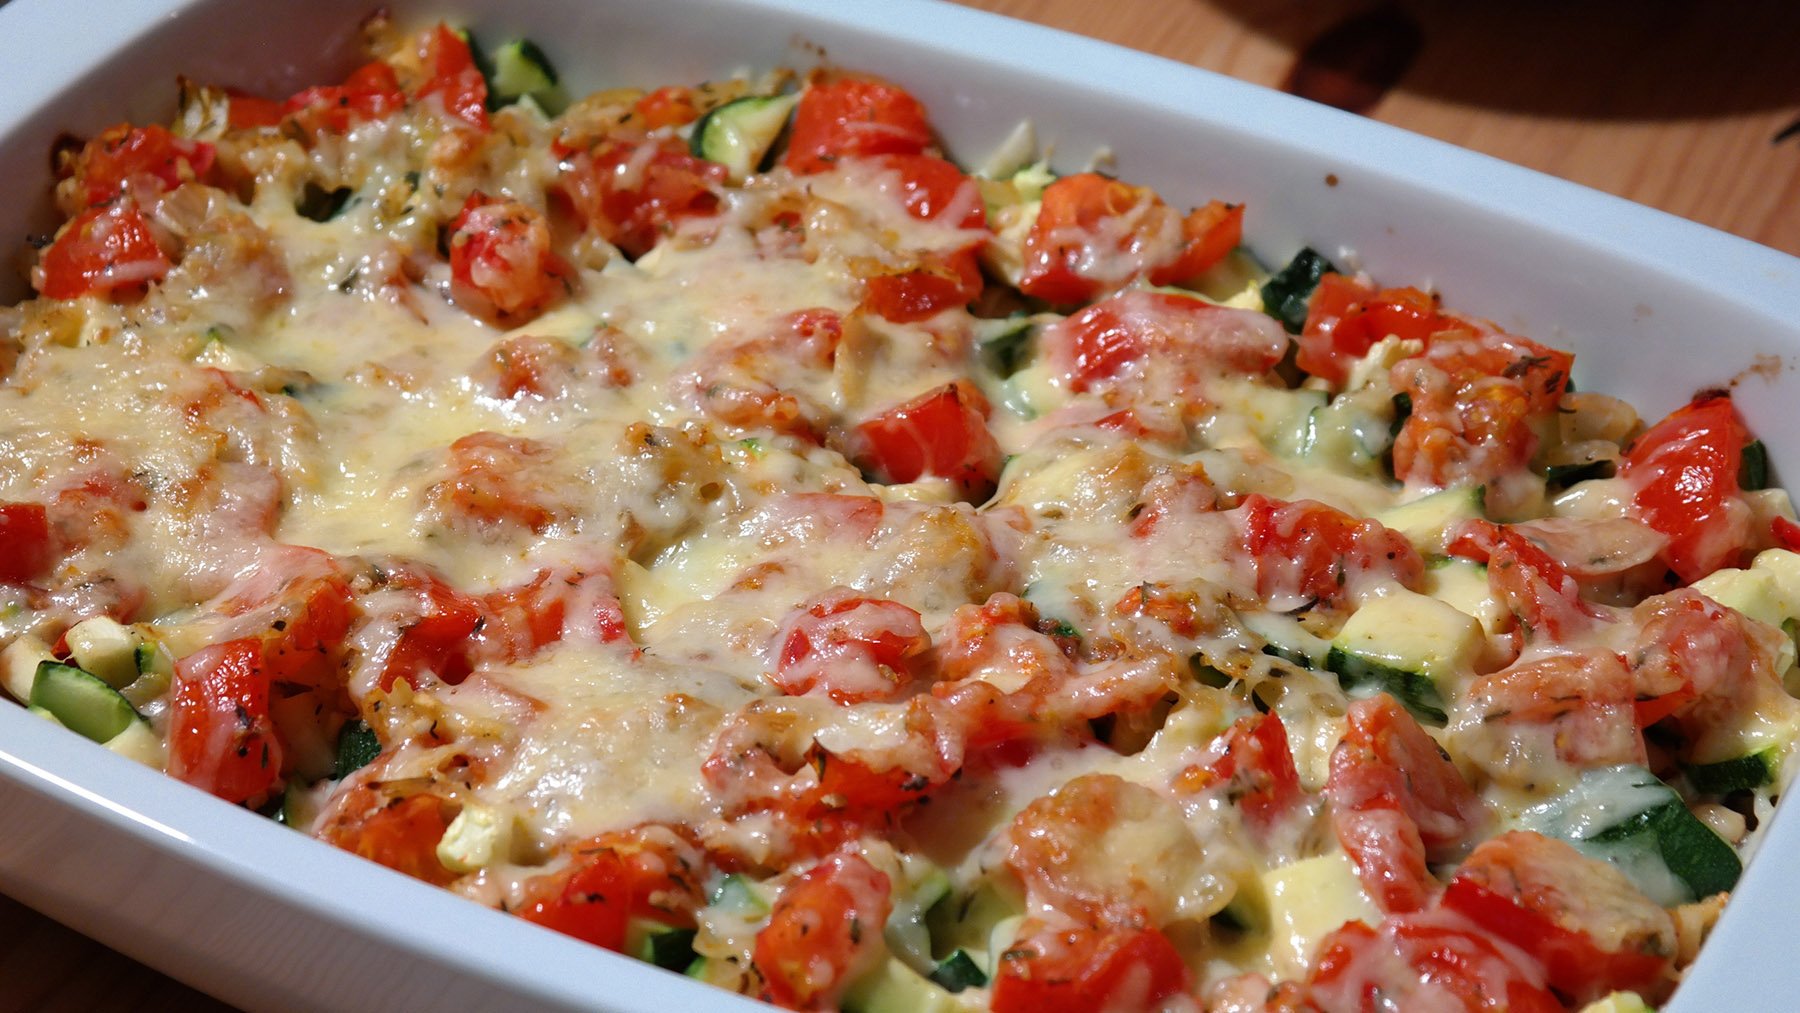 Stock photo of a baked dish with fresh vegetables and melted cheese (Creative Commons image, courtesy of RawPixel.com)